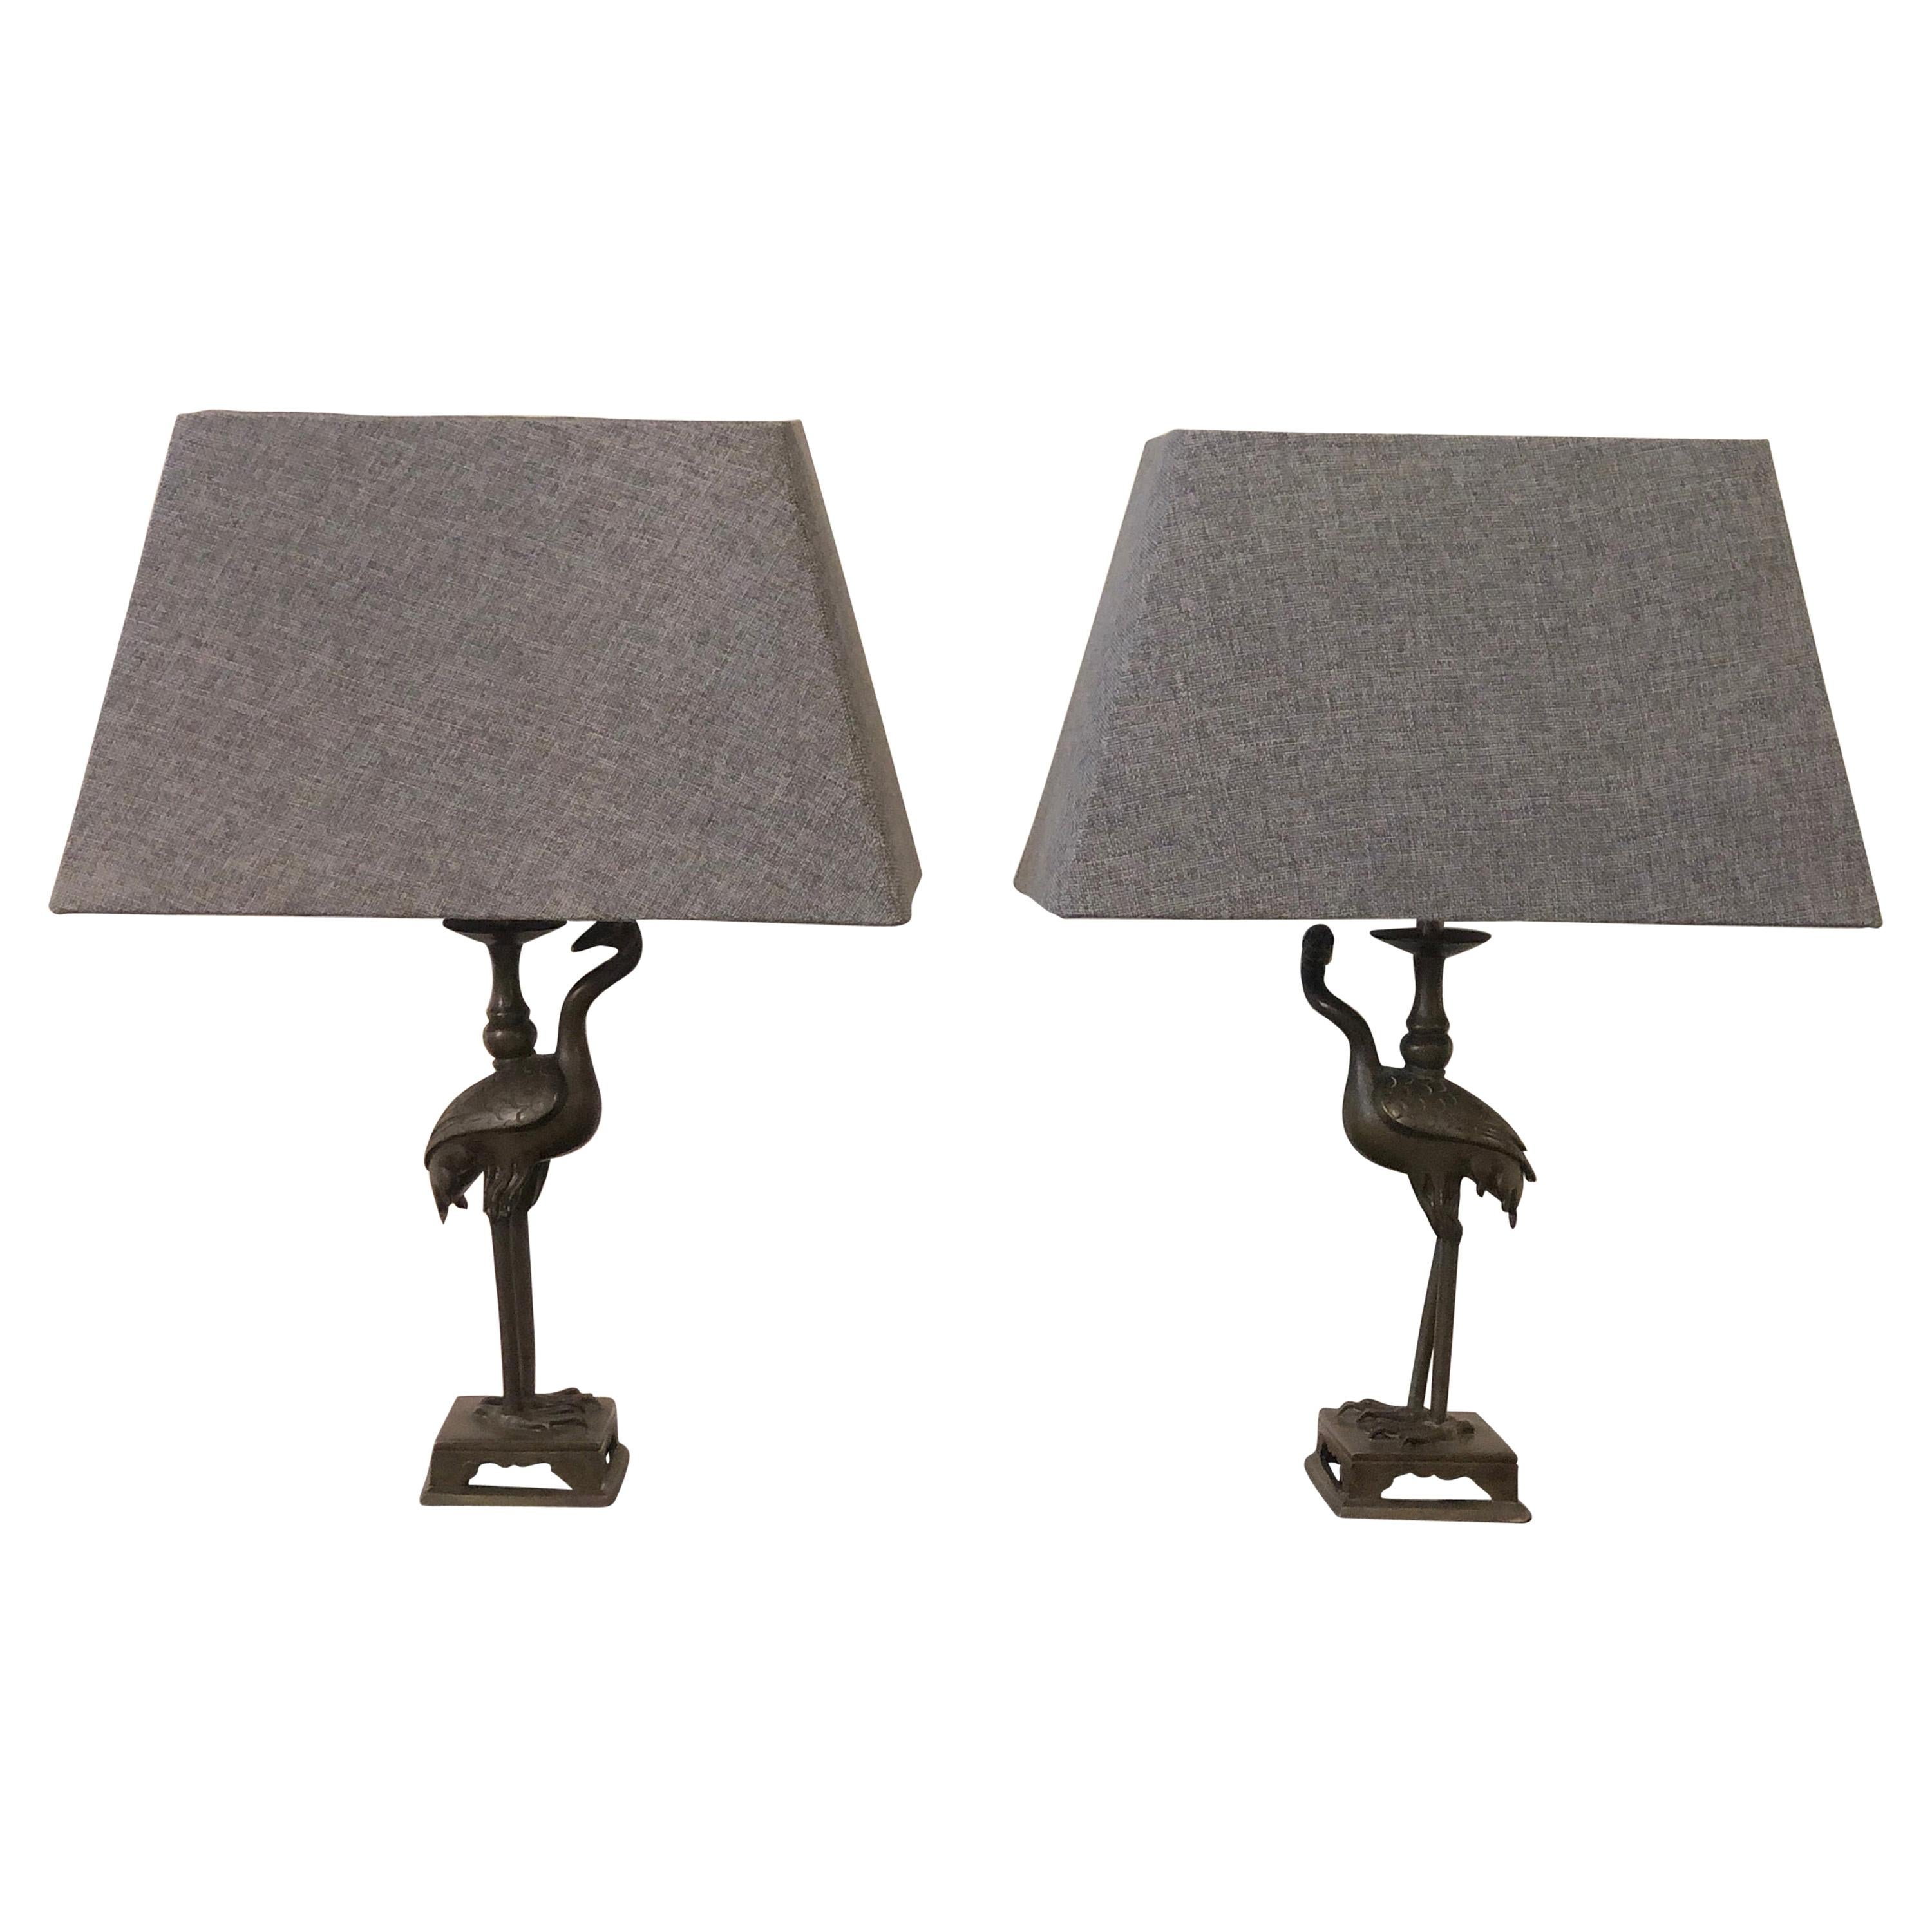 Animalier Small Bronze Herons Shaped Table Lamps